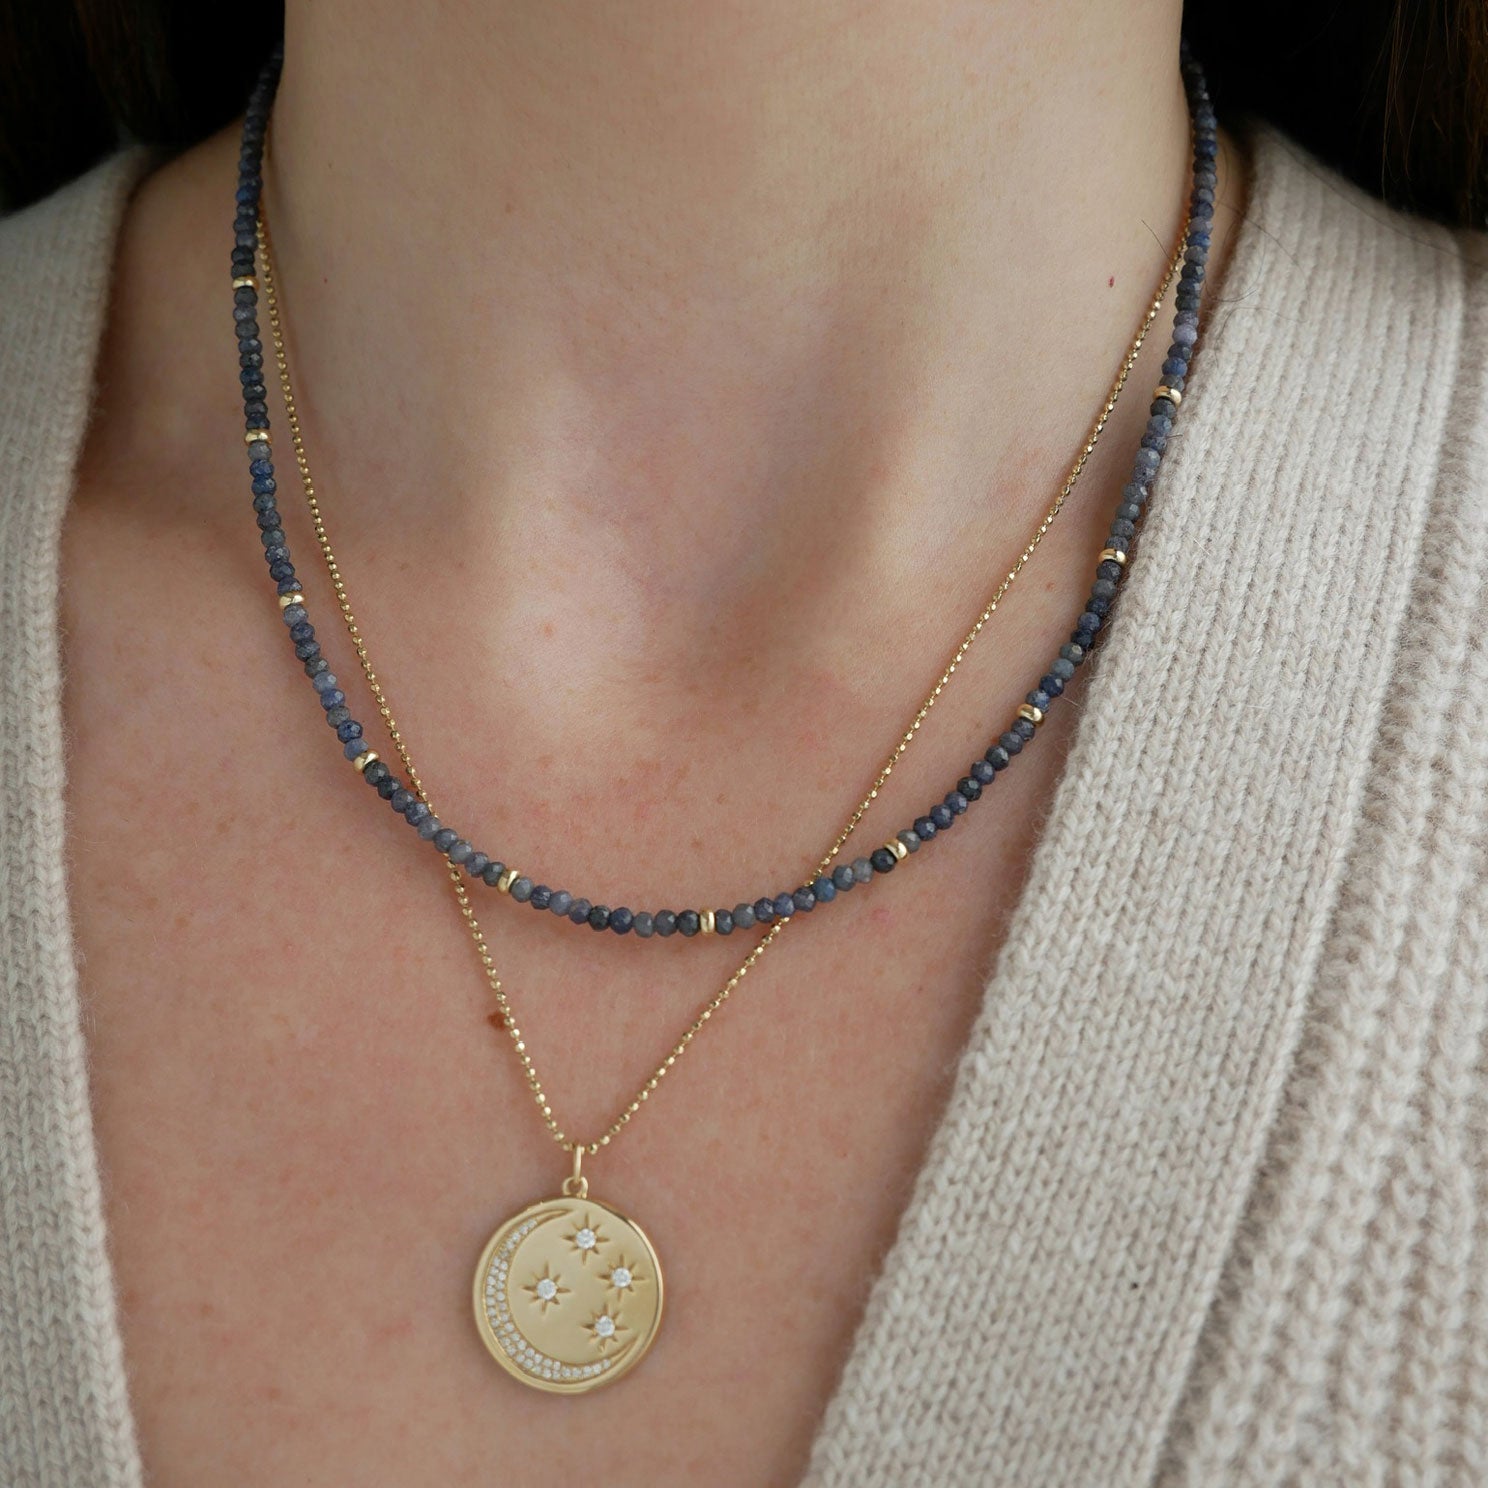 Birthstone Bead Necklace In Blue Sapphire styled on neck of model wearing gold celestial pendant necklace and wearing tan sweater